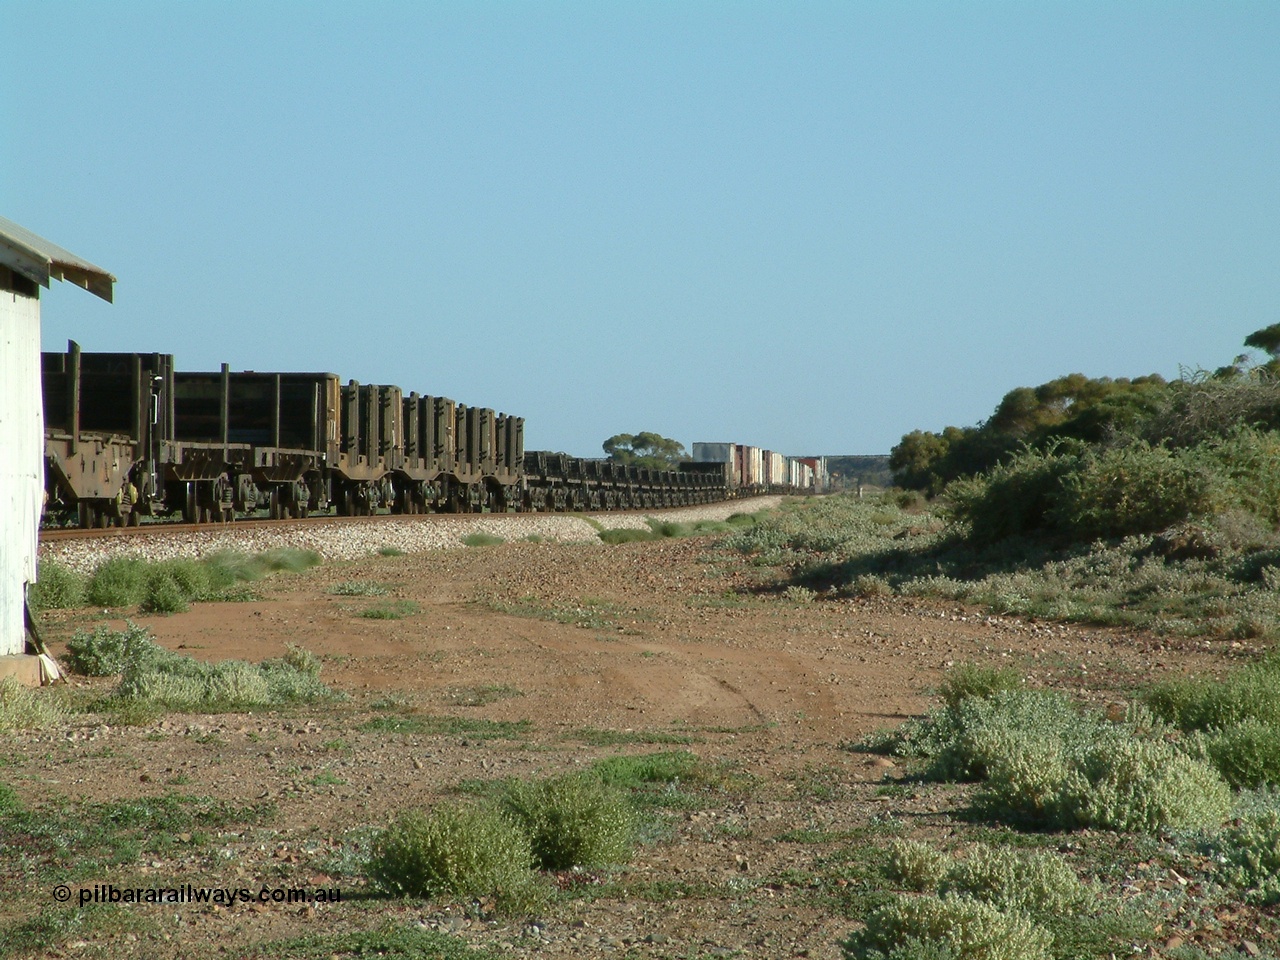 030404 083001
Port Germein, Perth bound steel and intermodal hurries through on the main with empty steel loading on the rear. 4th April 2003.
